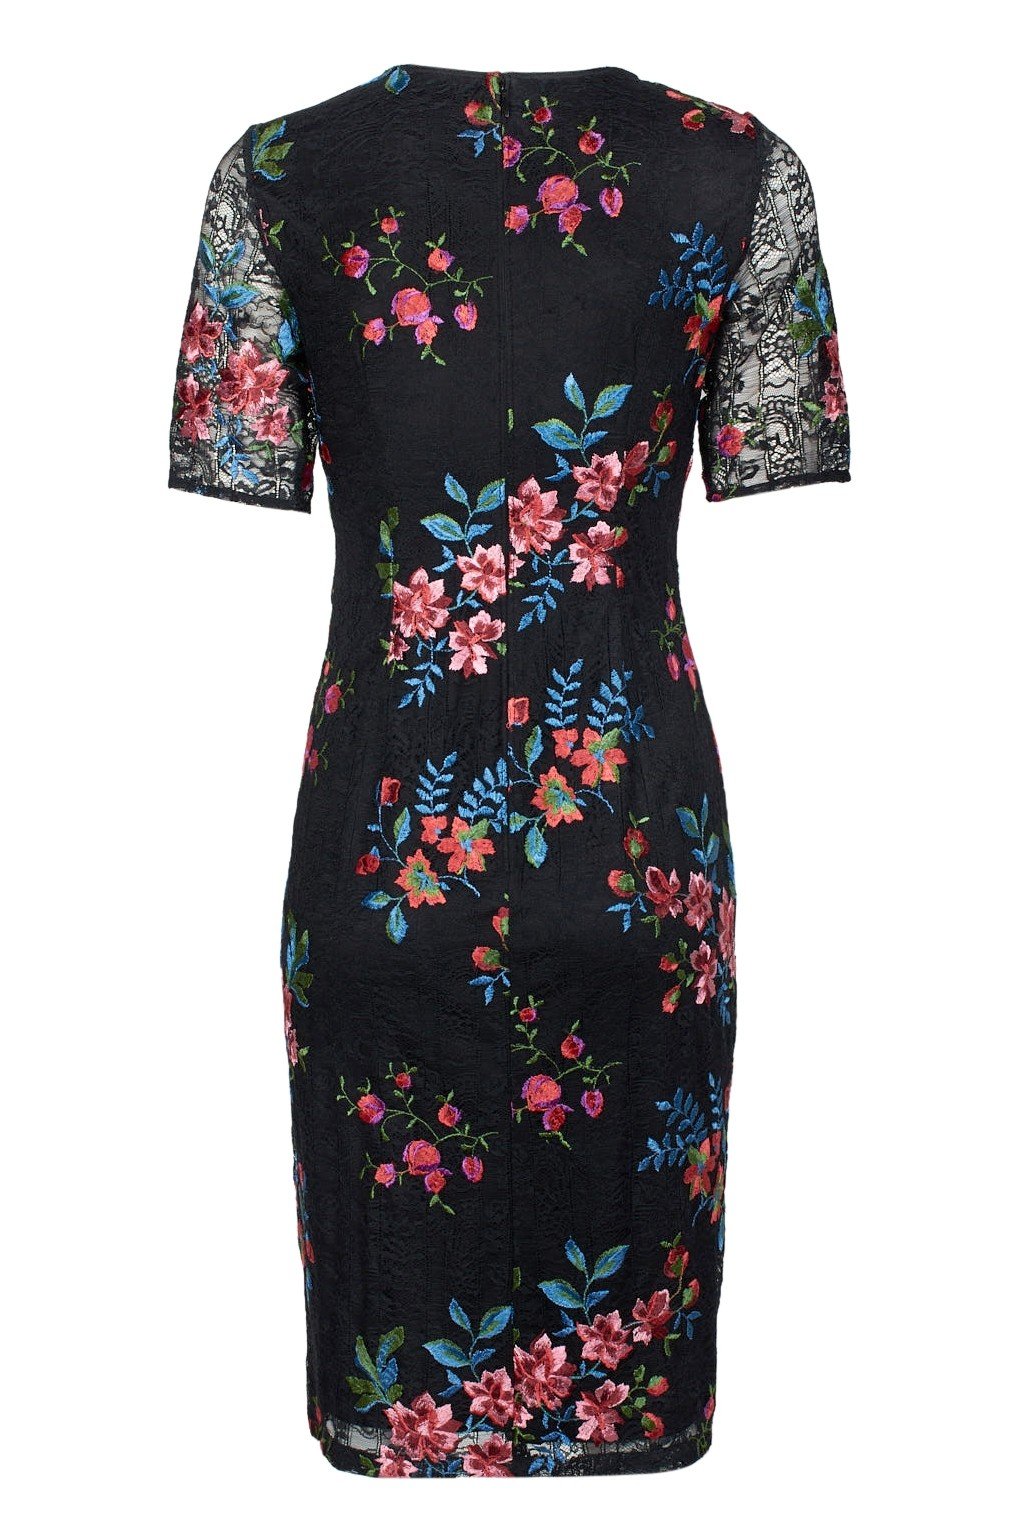 Adrianna Papell - AP1D102954 Floral Embroidered V-neck Sheath Dress In Black and Multi-Color